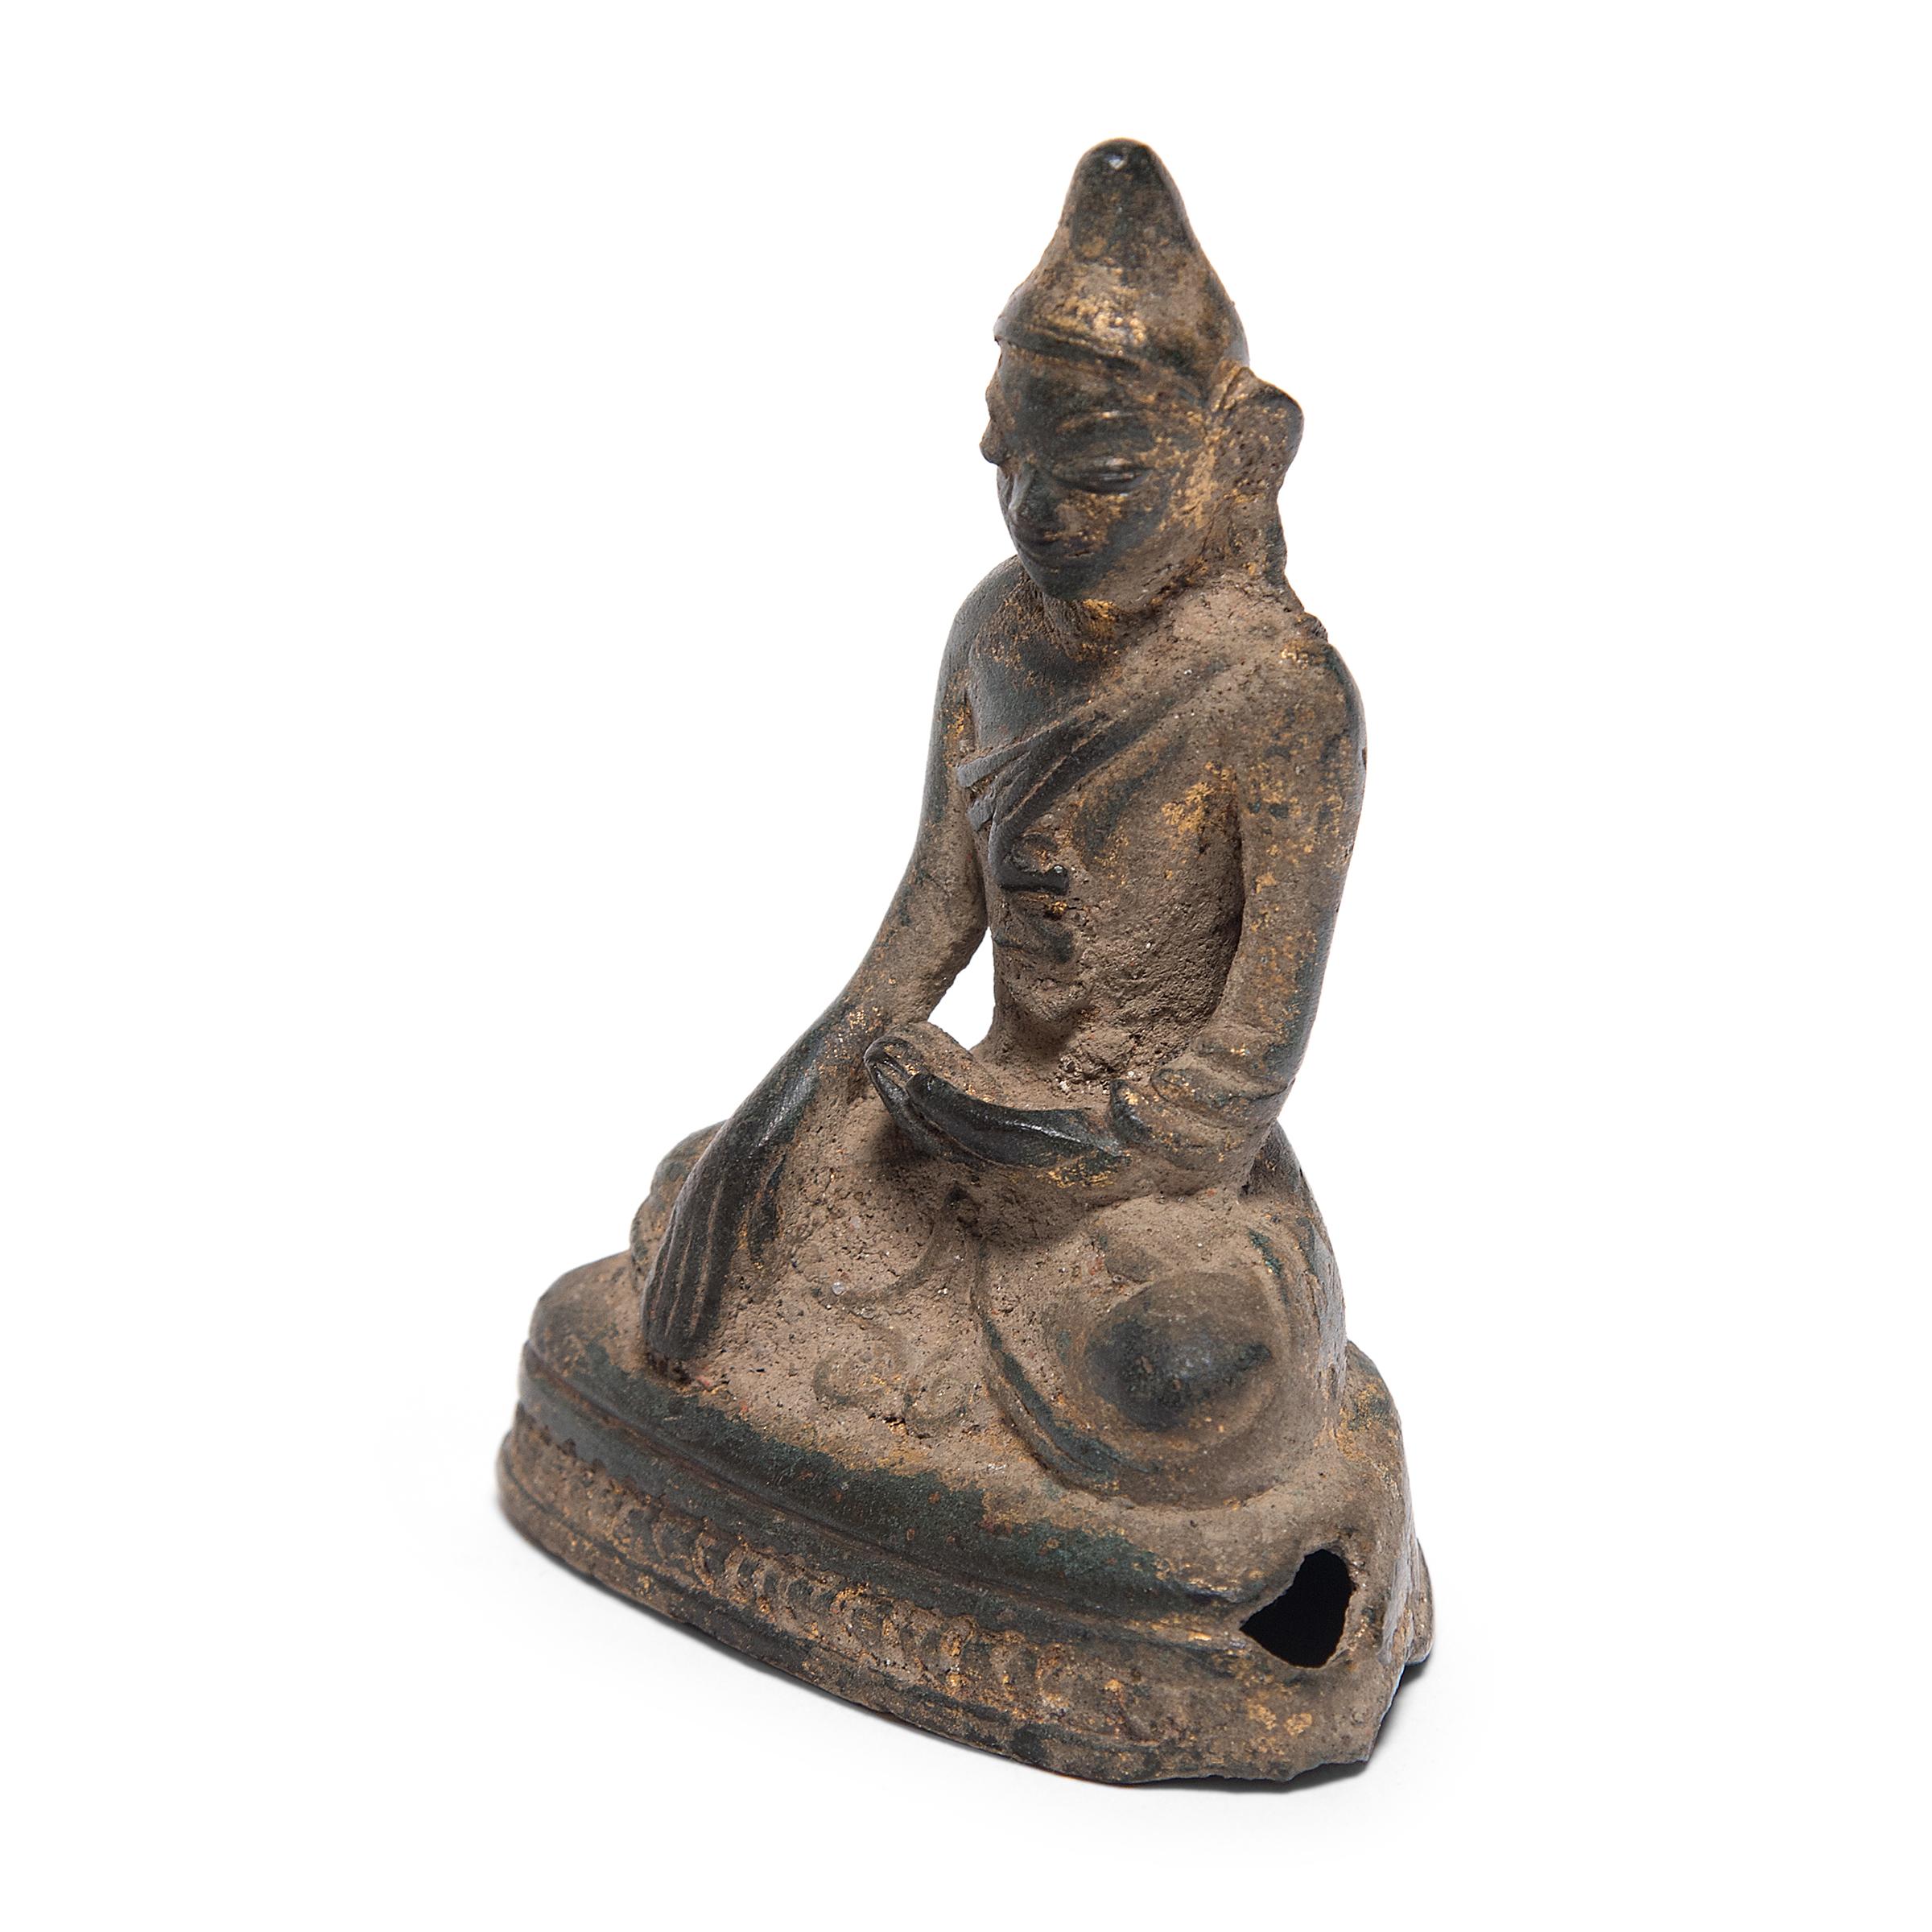 Once ornately gilt, this serene bronze seated Buddha was created in Thailand in the mid-19th century. Cast in the older Sukhothai style, the Buddha bears a uniquely Thai flame-like spike stretching upward from the crown of his head. Called an